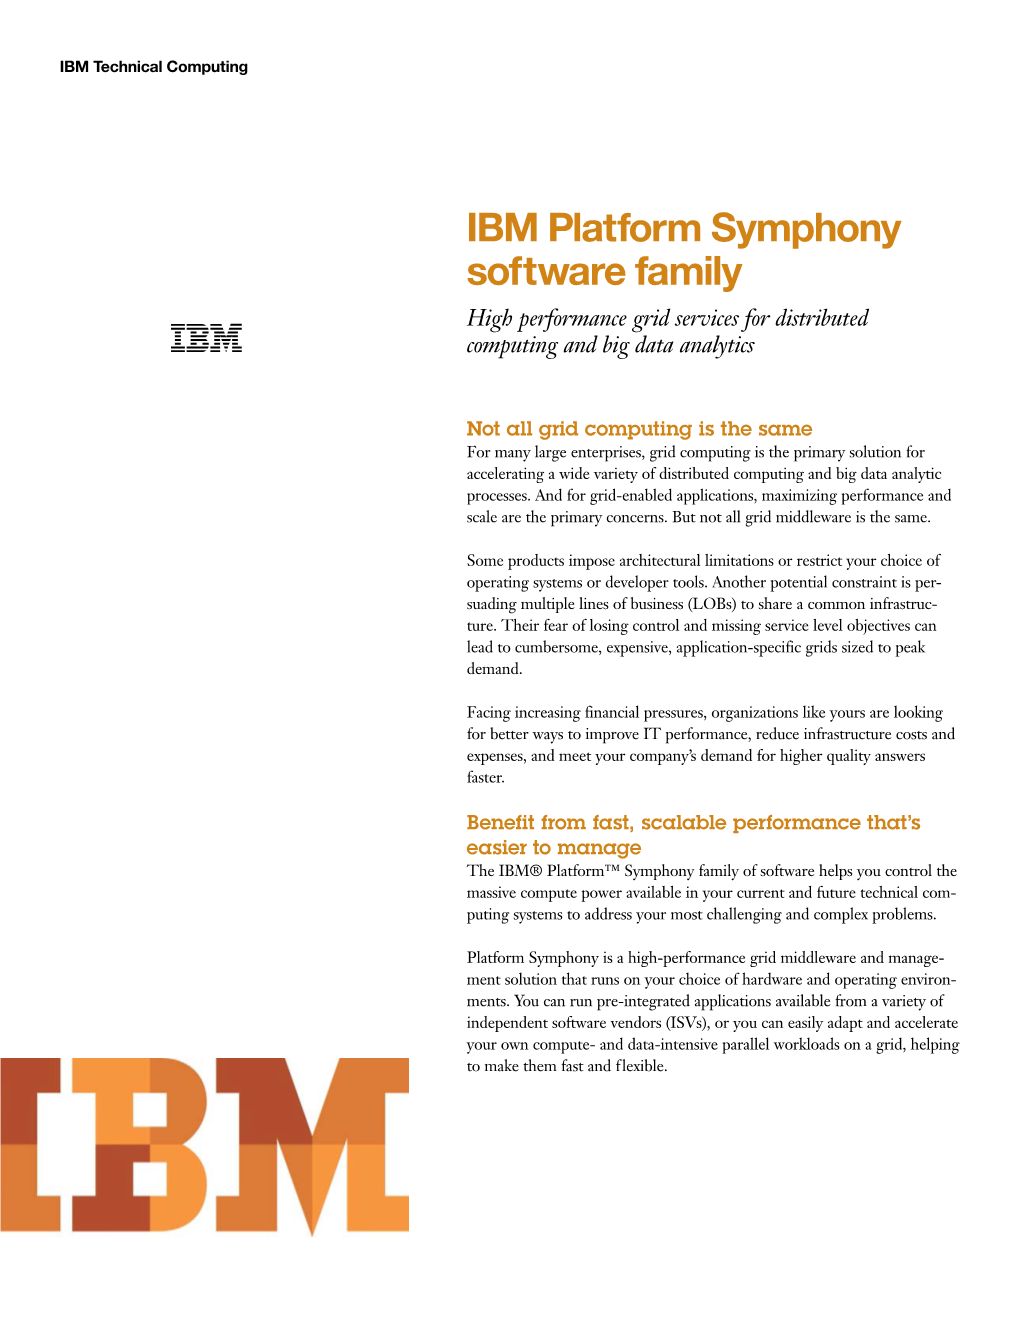 IBM Platform Symphony Software Family High Performance Grid Services for Distributed Computing and Big Data Analytics